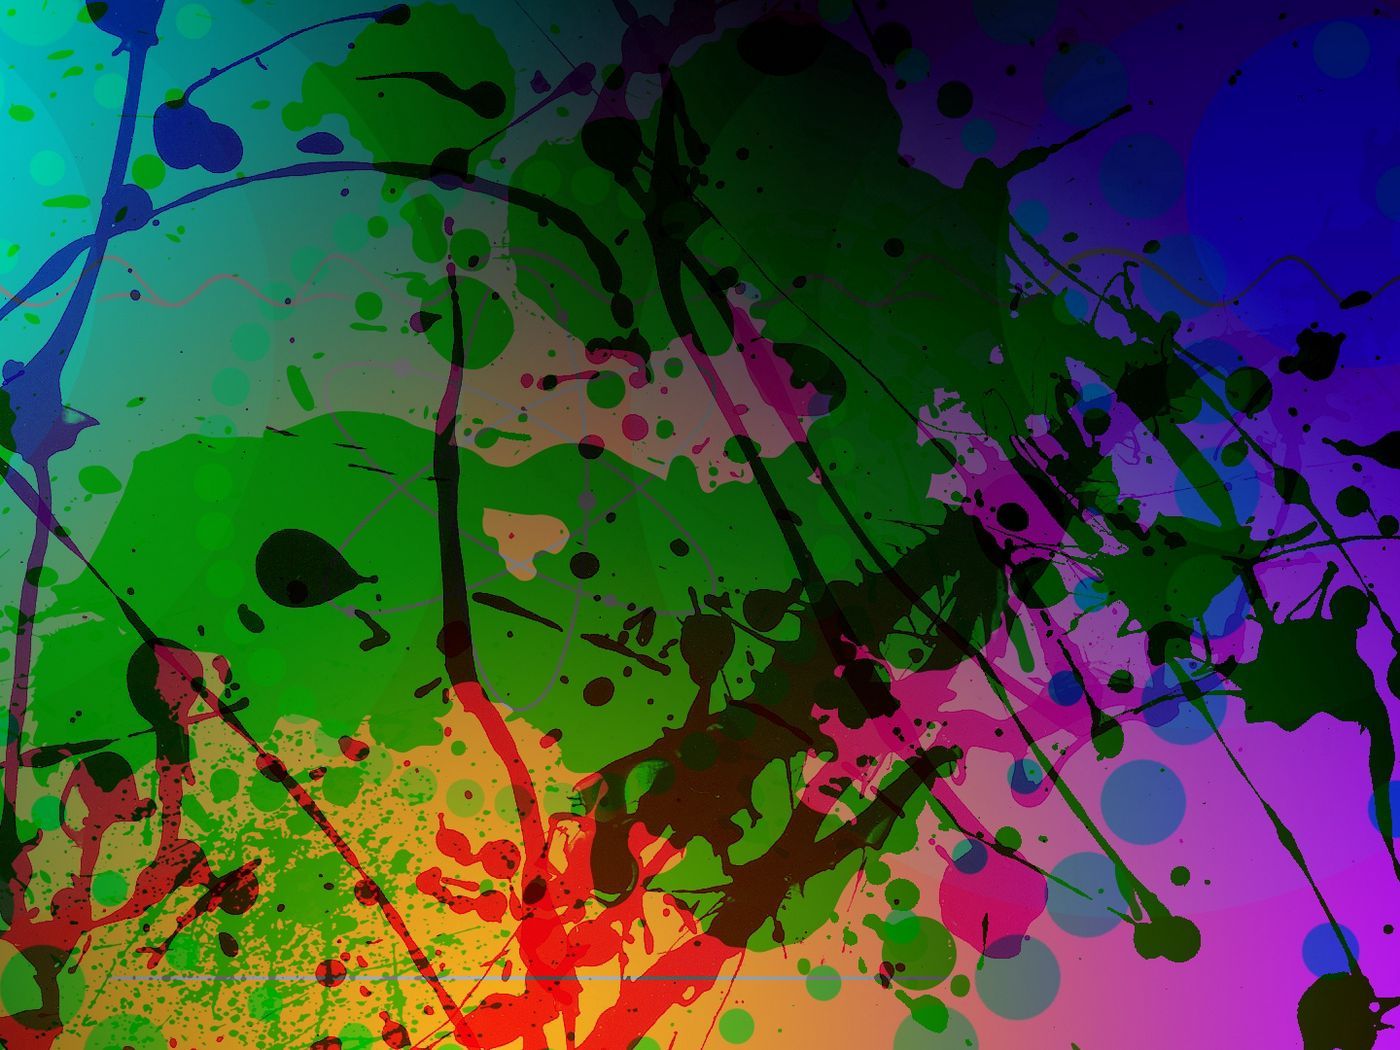 Download wallpaper 1400x1050 abstract, colorful, blur standard 4:3 HD background